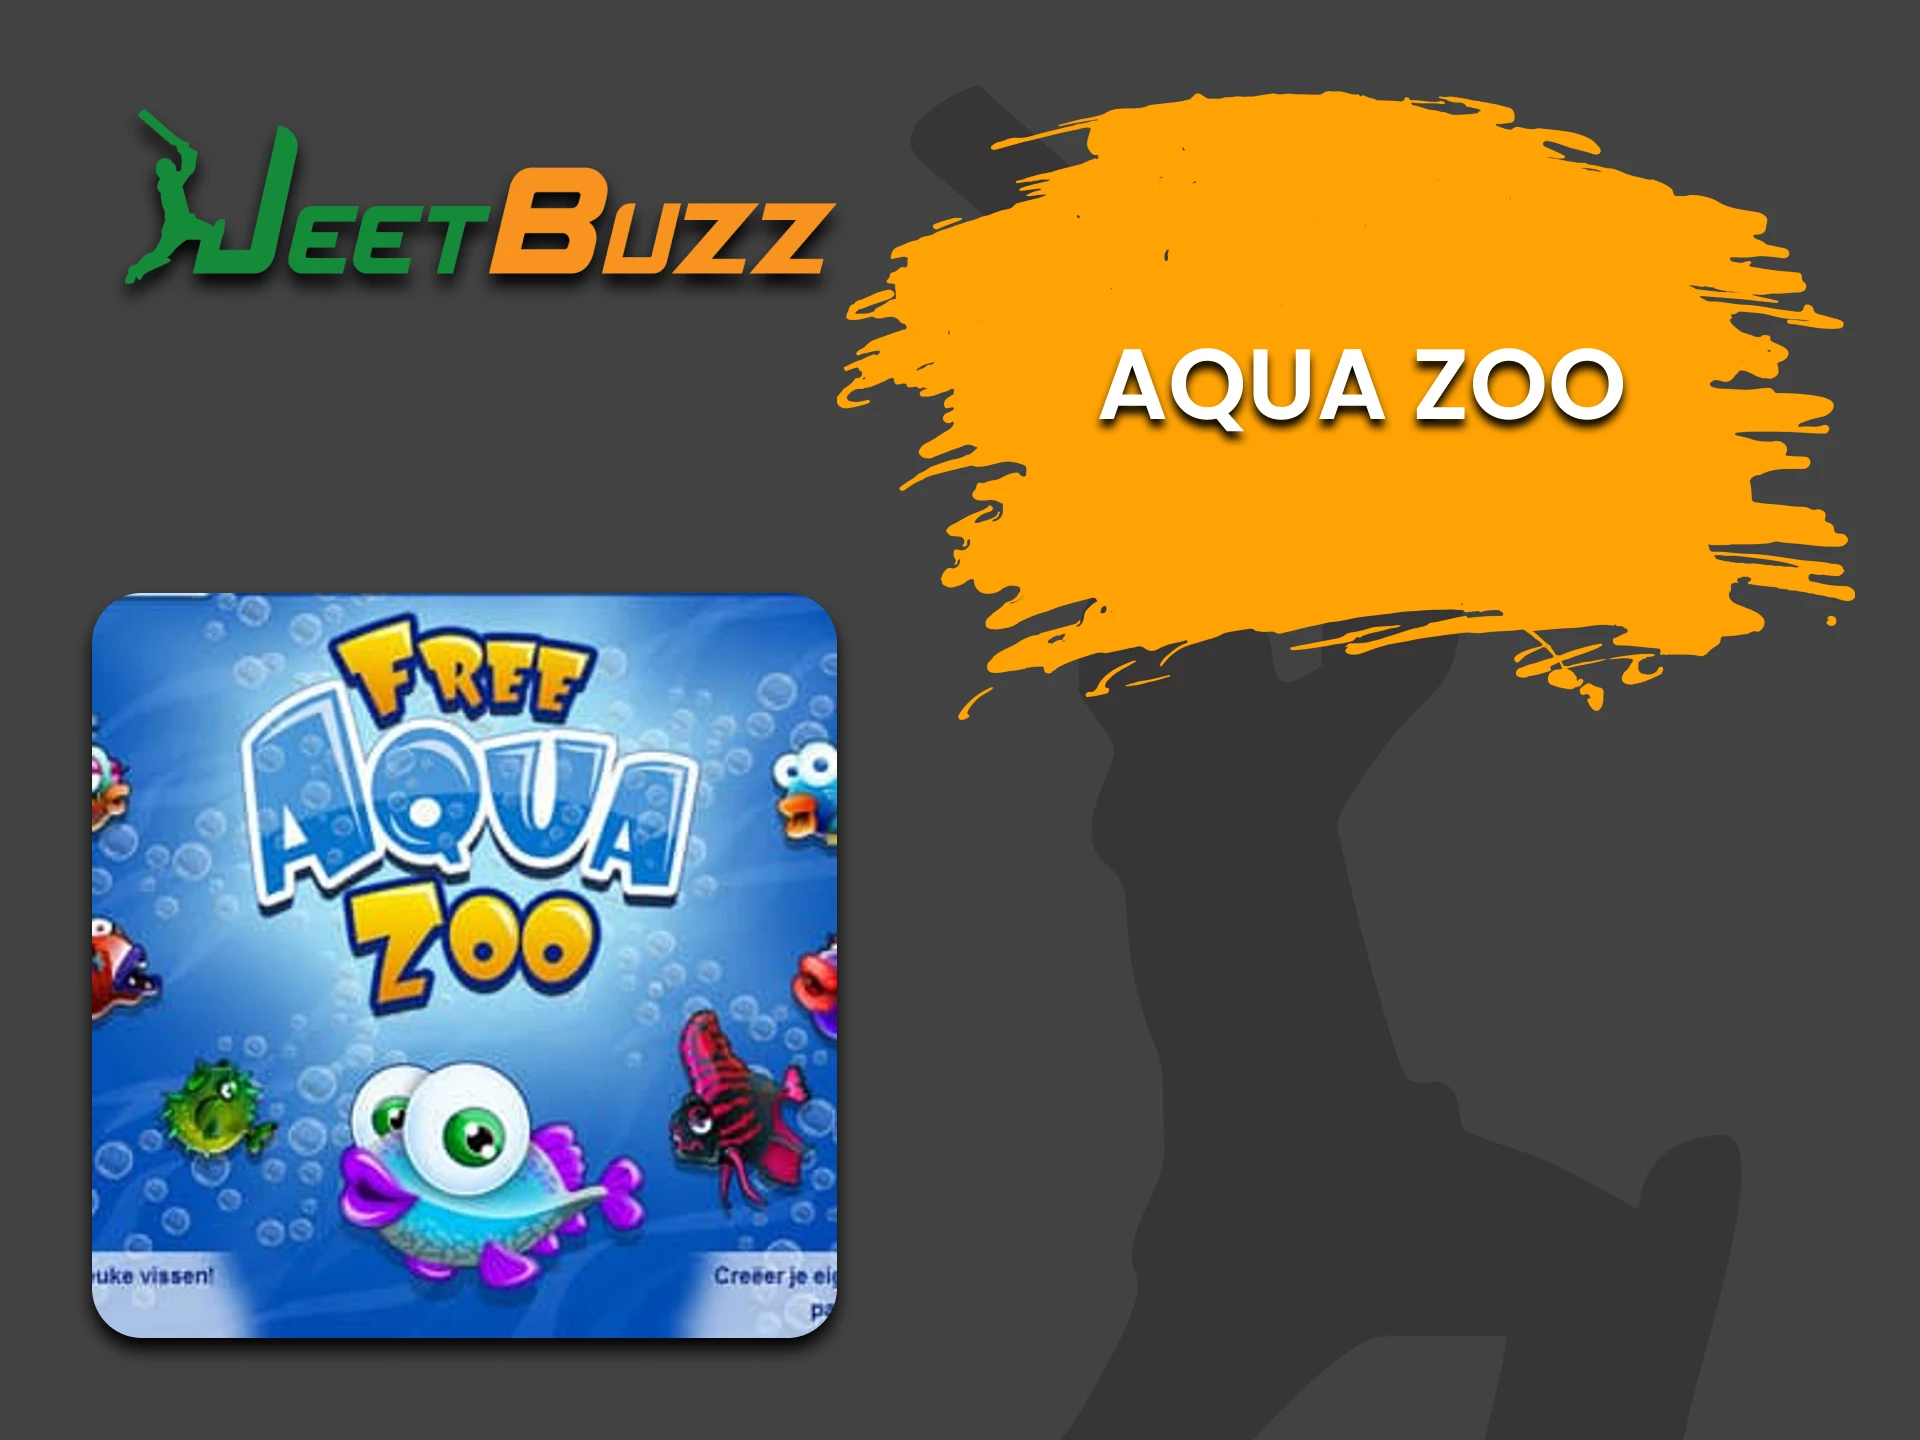 Try your hand at Aqua Zoo on JeetBuzz.